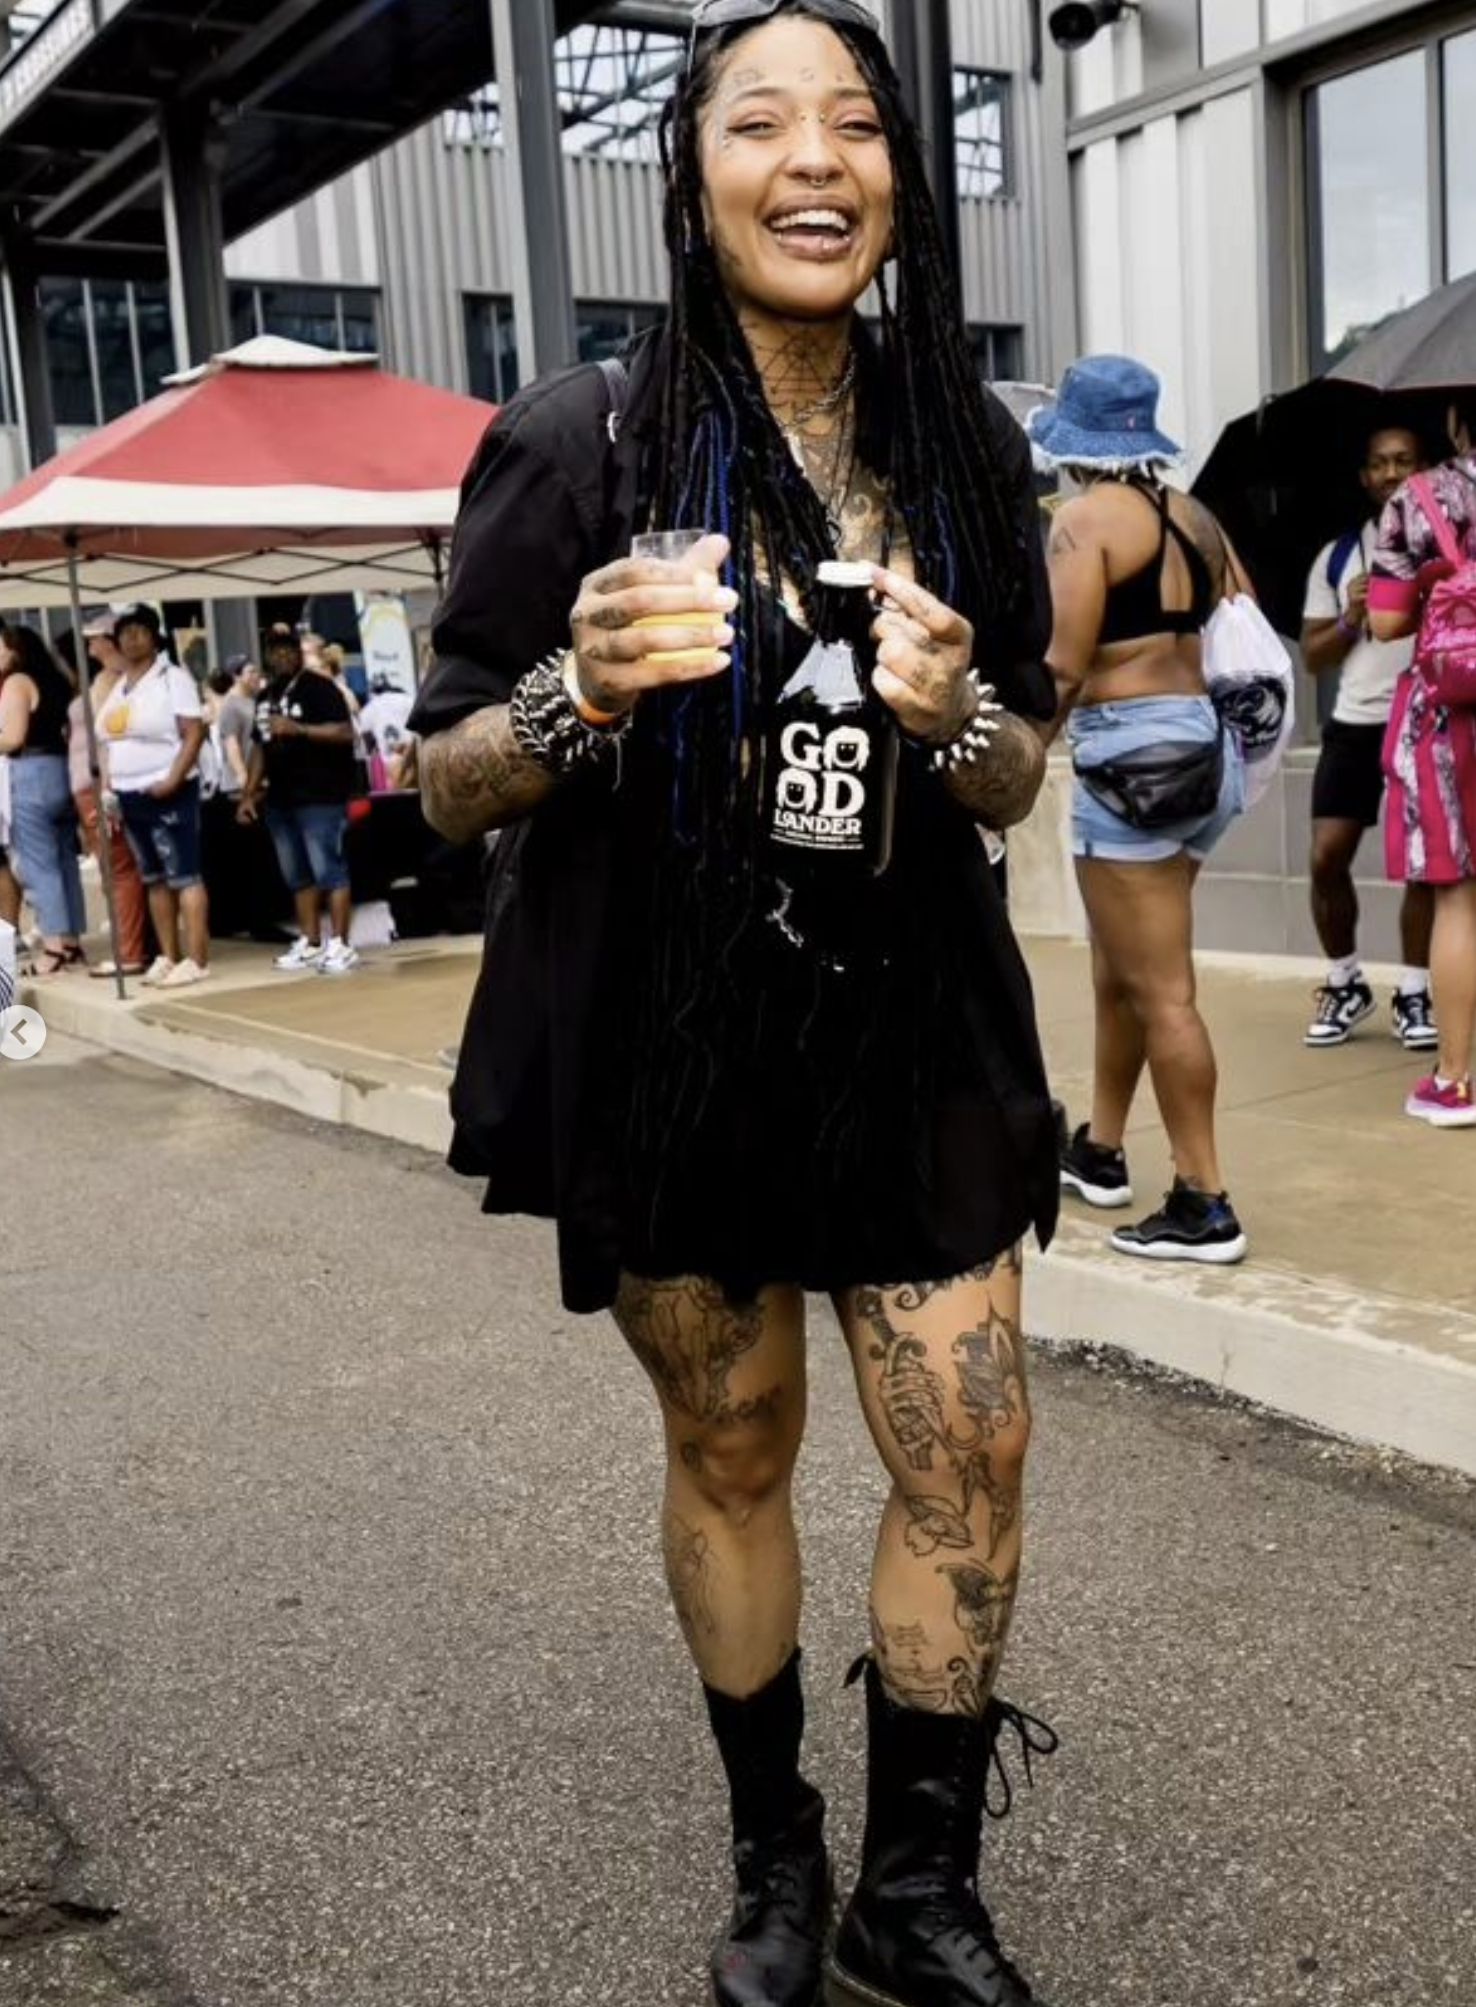 A Black person with tattoos laughing with a drink in their hands at the Barrel & Flow Festival.